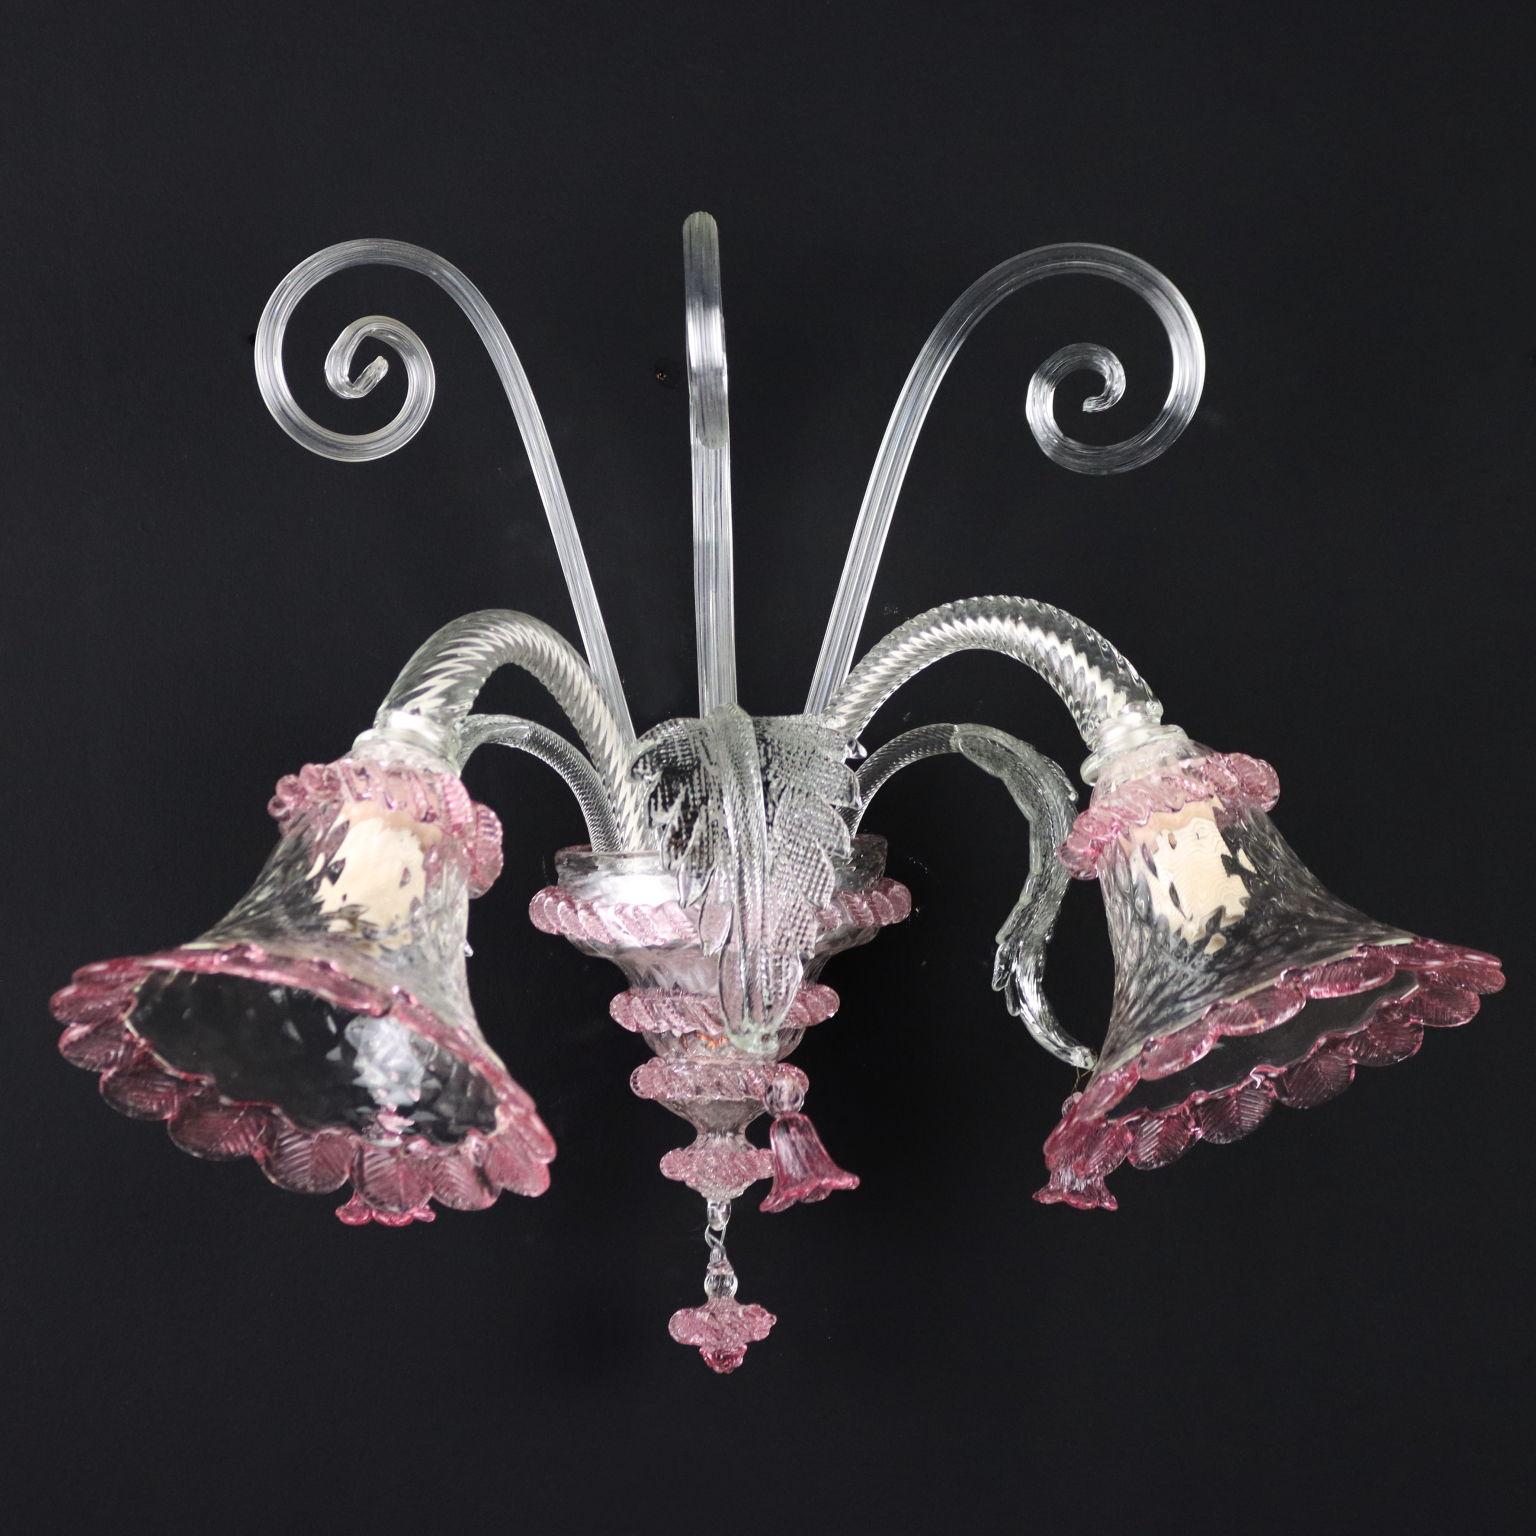 Two-light wall sconce with blown and coloured glass arms and bobeches. Italy 20th century.